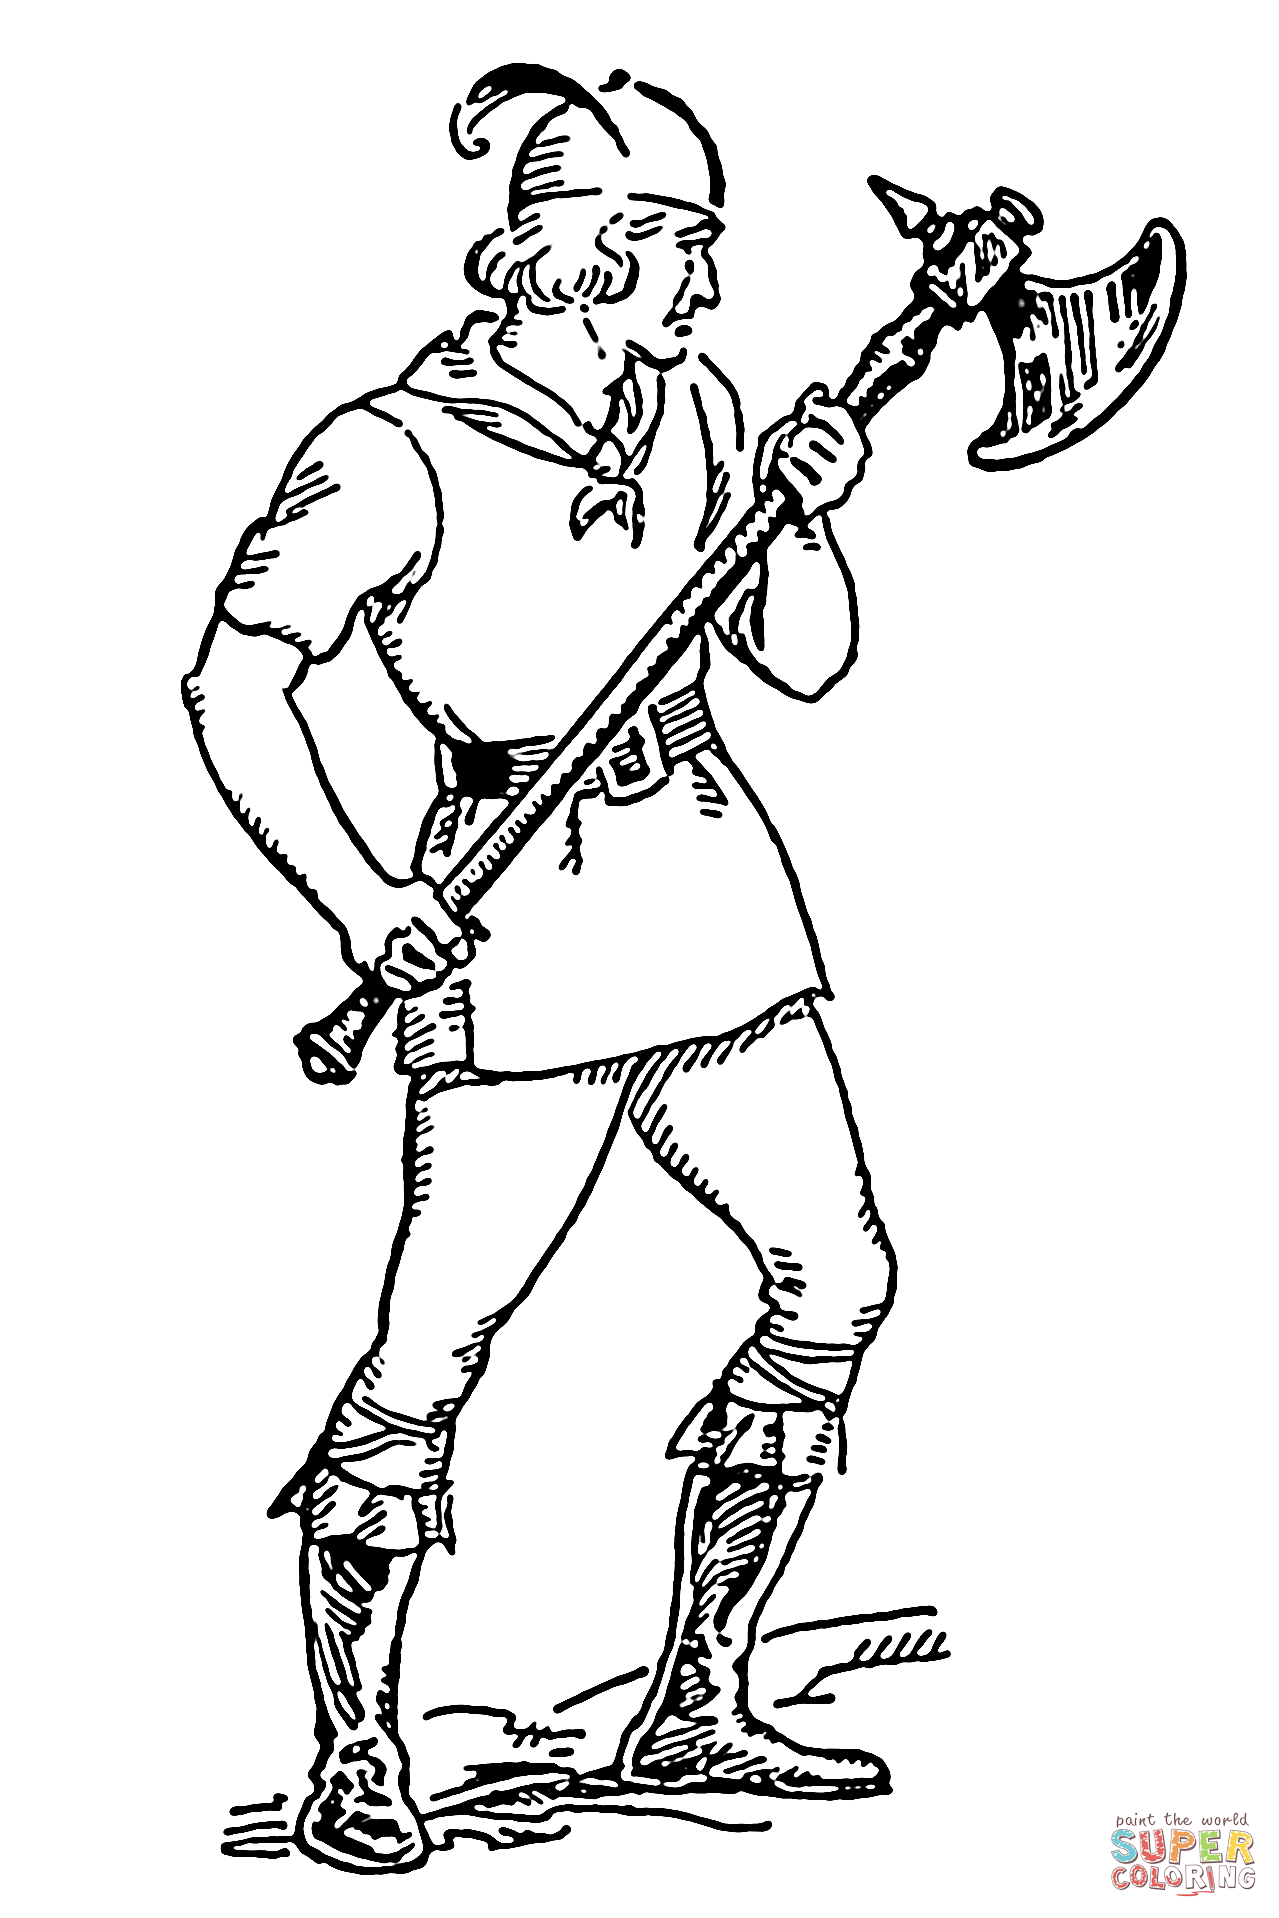 Man Holding a Battle Axe coloring page | Free Printable Coloring Pages